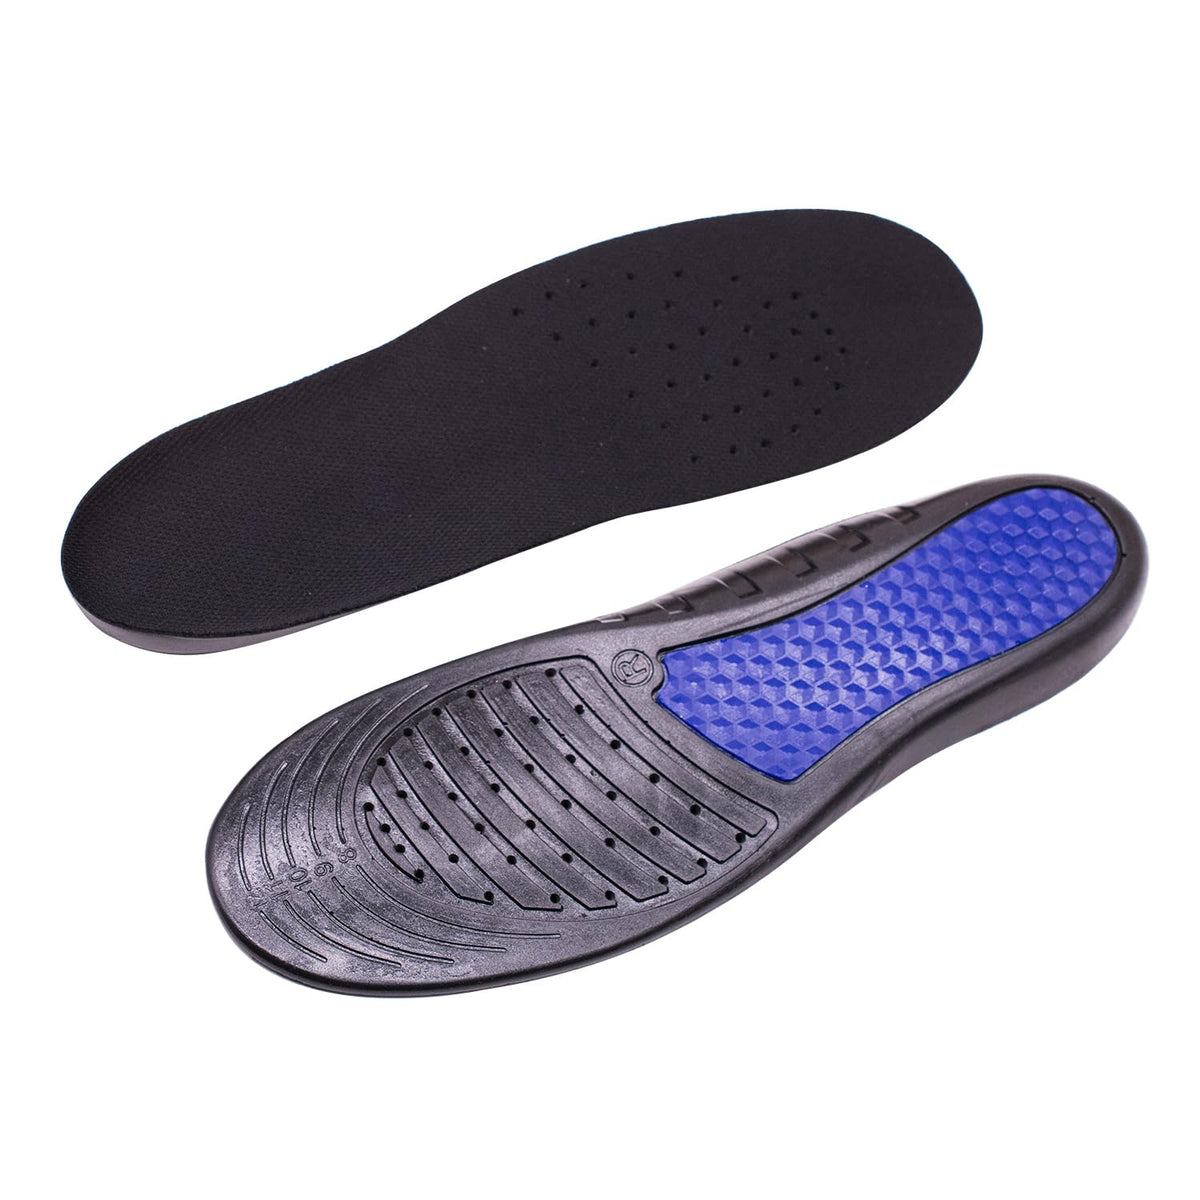 Dr Foot Work Insoles |For Foot Pain Relief – Work Boot Insole | Experience Comfort and Shock Absorption | for All-Day Support in Your Shoes | Available For Men & Women - 1 Pair (Small Size)